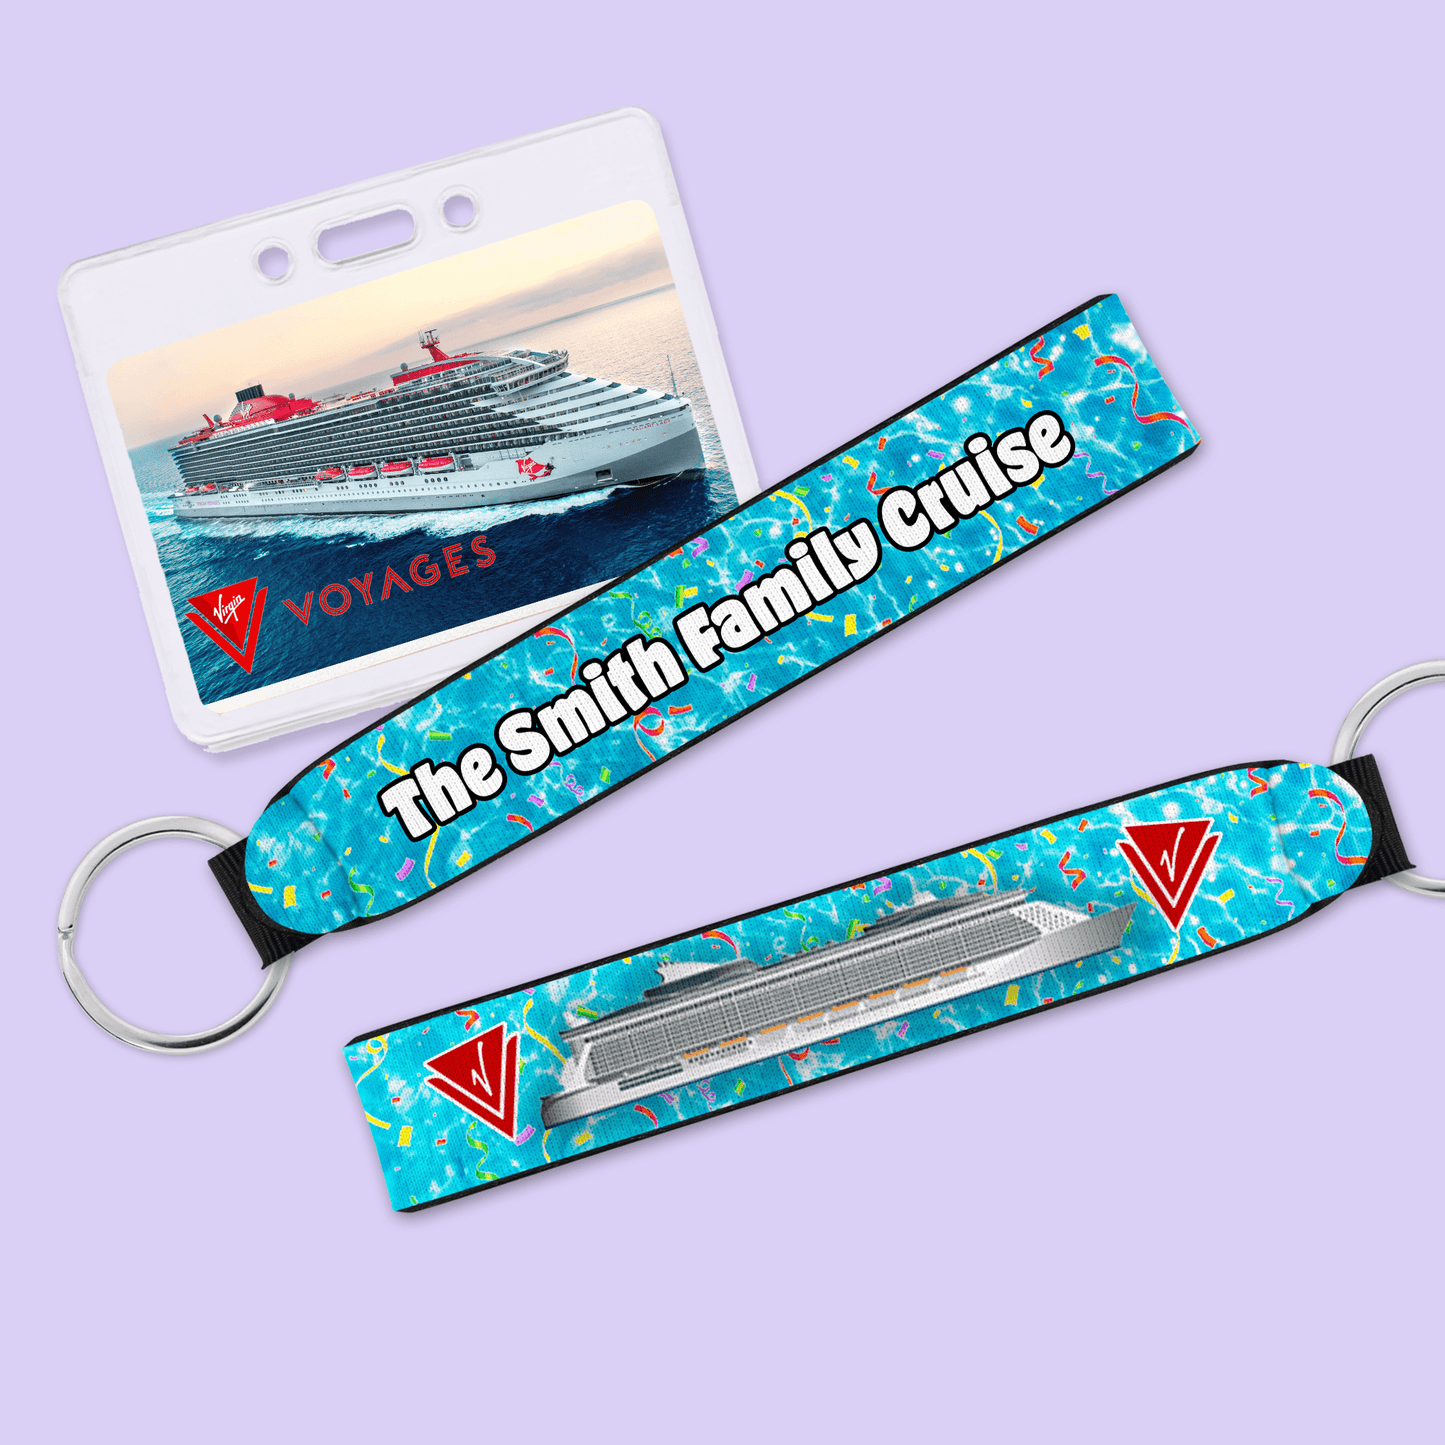 Personalized Virgin Voyages Cruise Wristlet - Two Crafty Gays